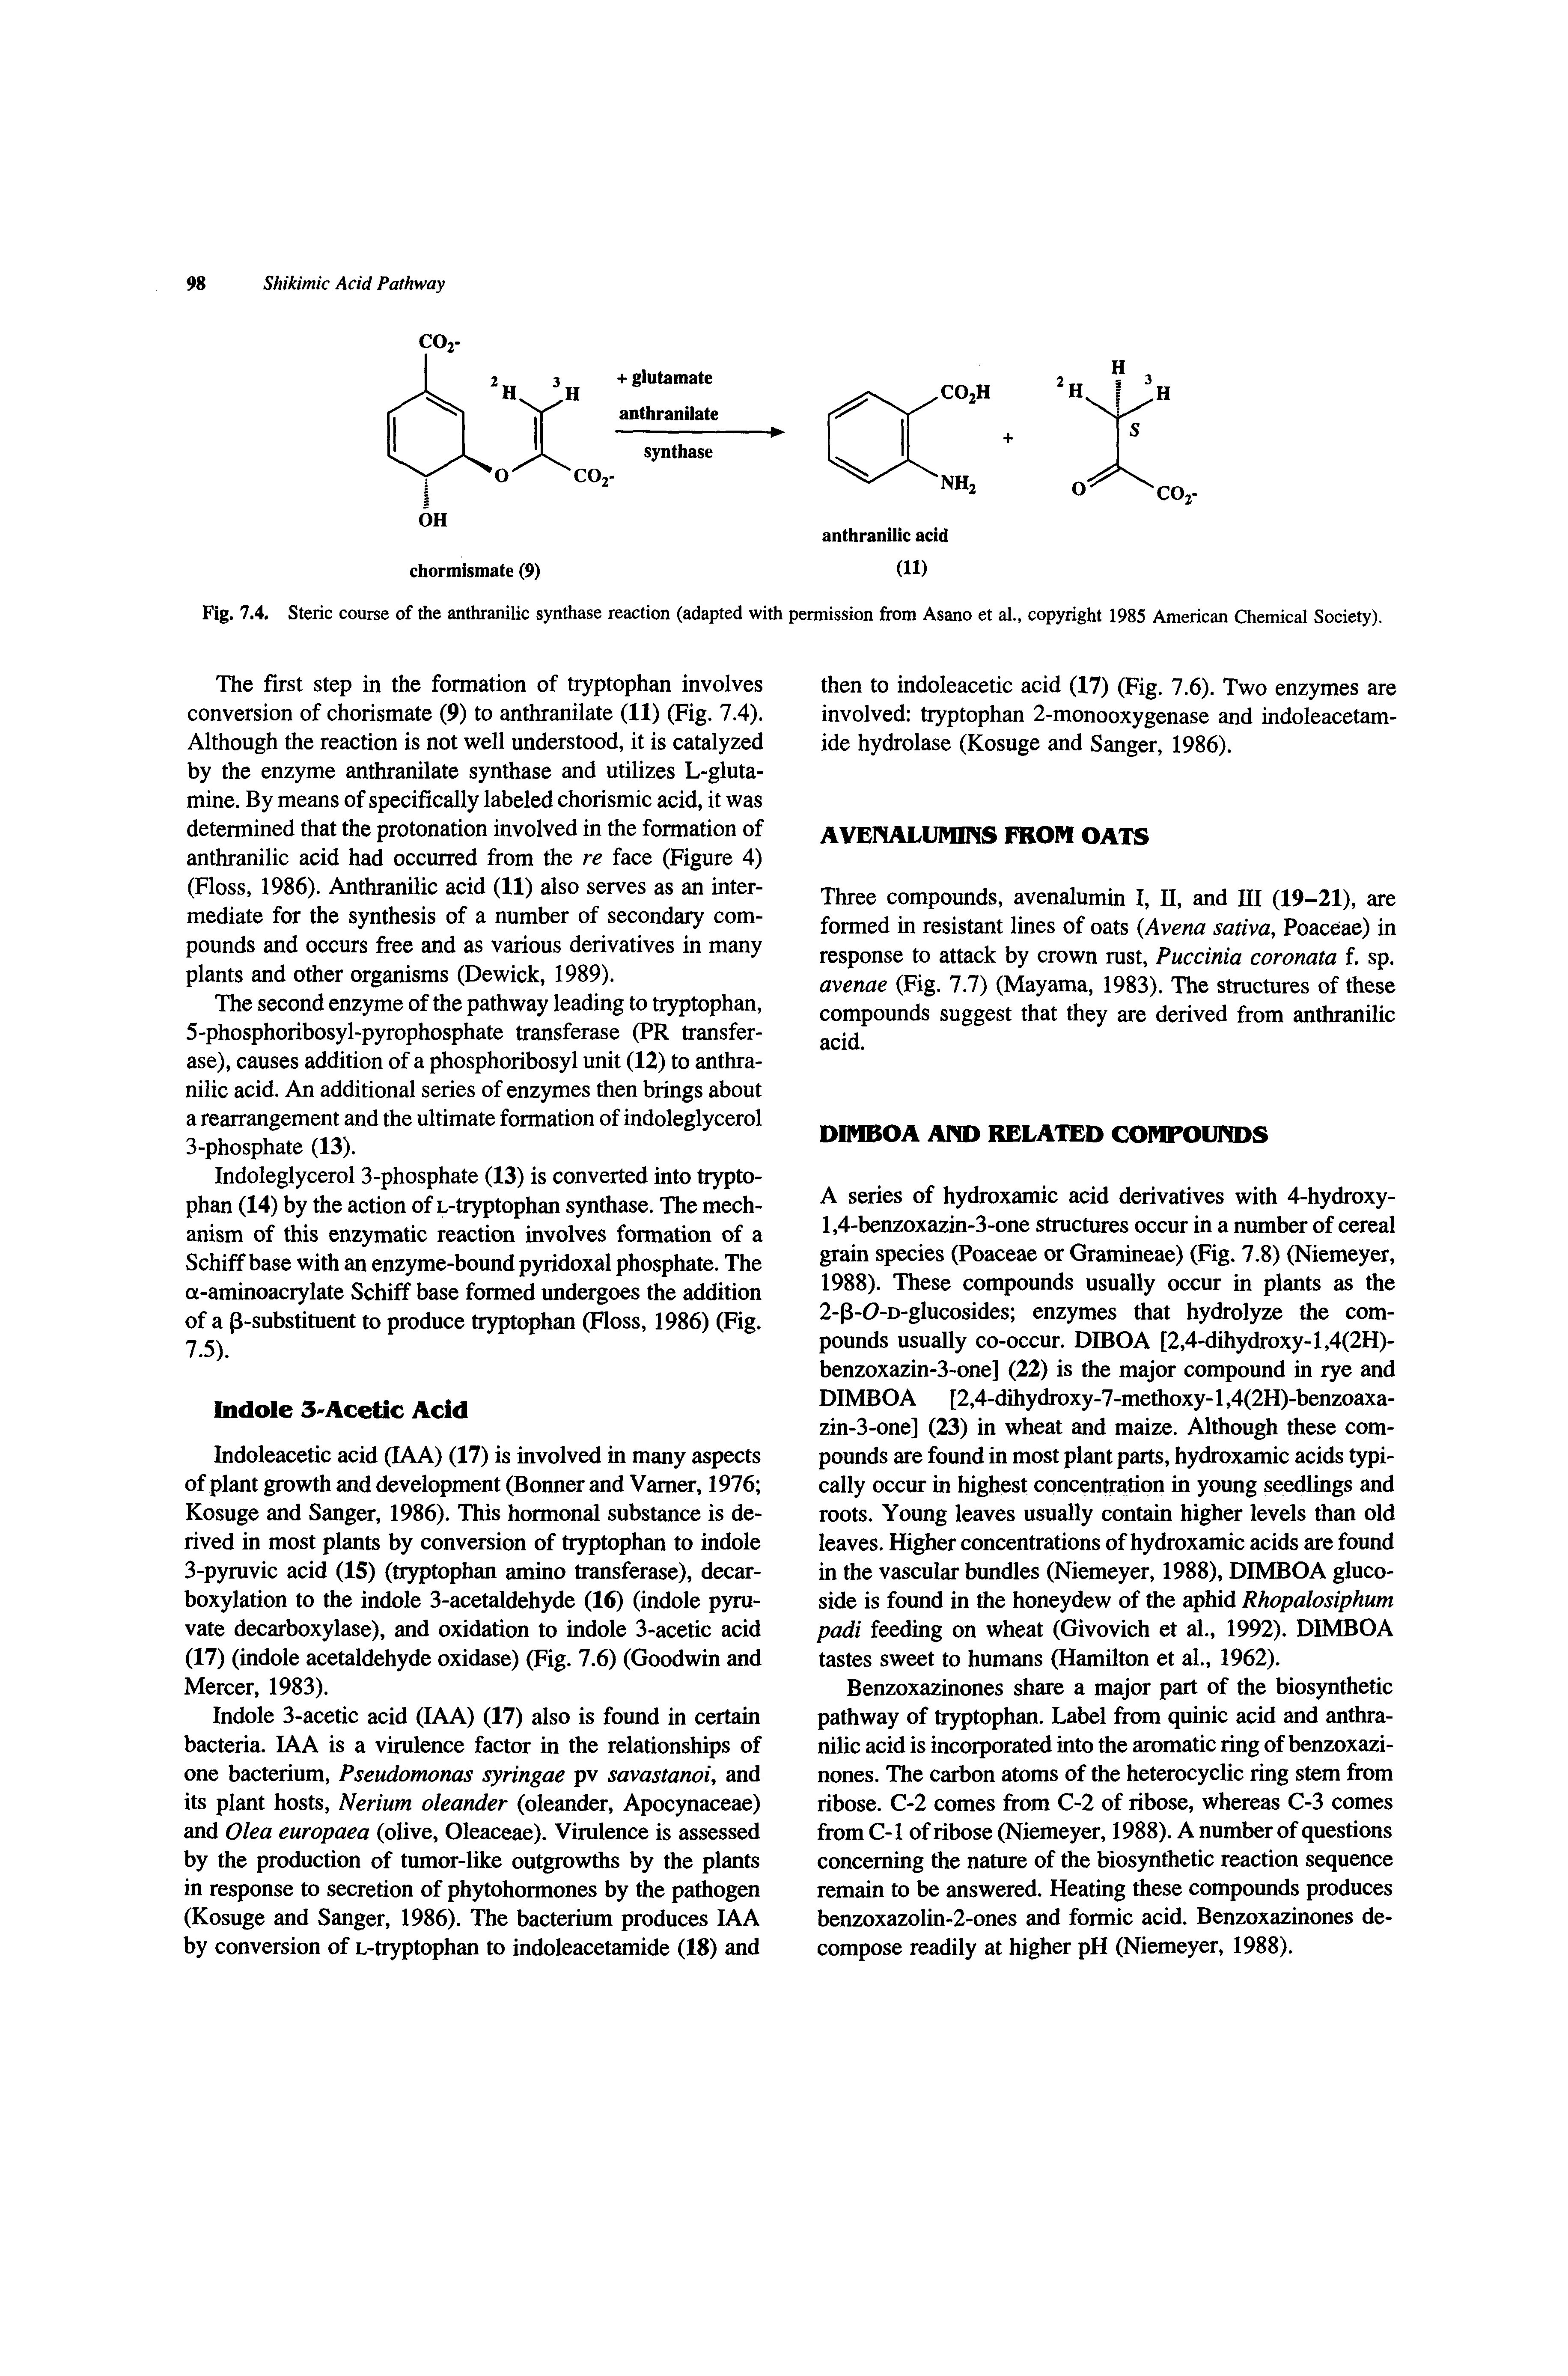 Fig. 7.4. Steric course of the anthranilic synthase reaction (adapted with permission from Asano et al., copyright 1985 American Chemical Society).